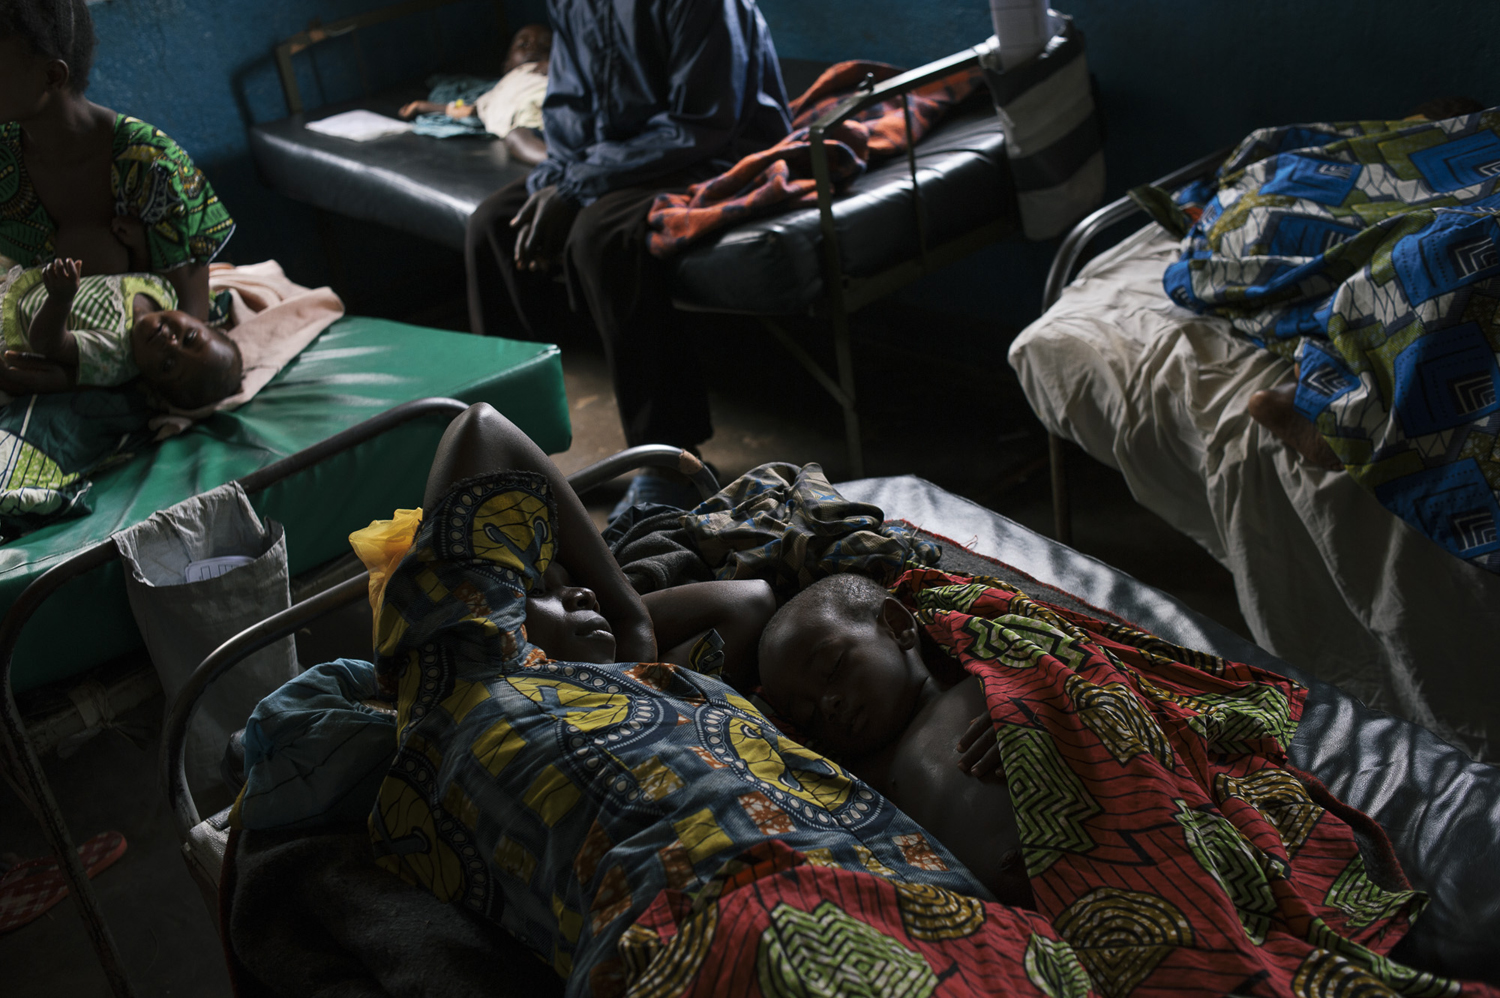 A mother lays next to her child who is suffering from malaria in the health centre in Nyabiondo. Staff at the health centre say they are dealing with an epidemic of malaria. Few people have mosquito nets, July 21, 2014.